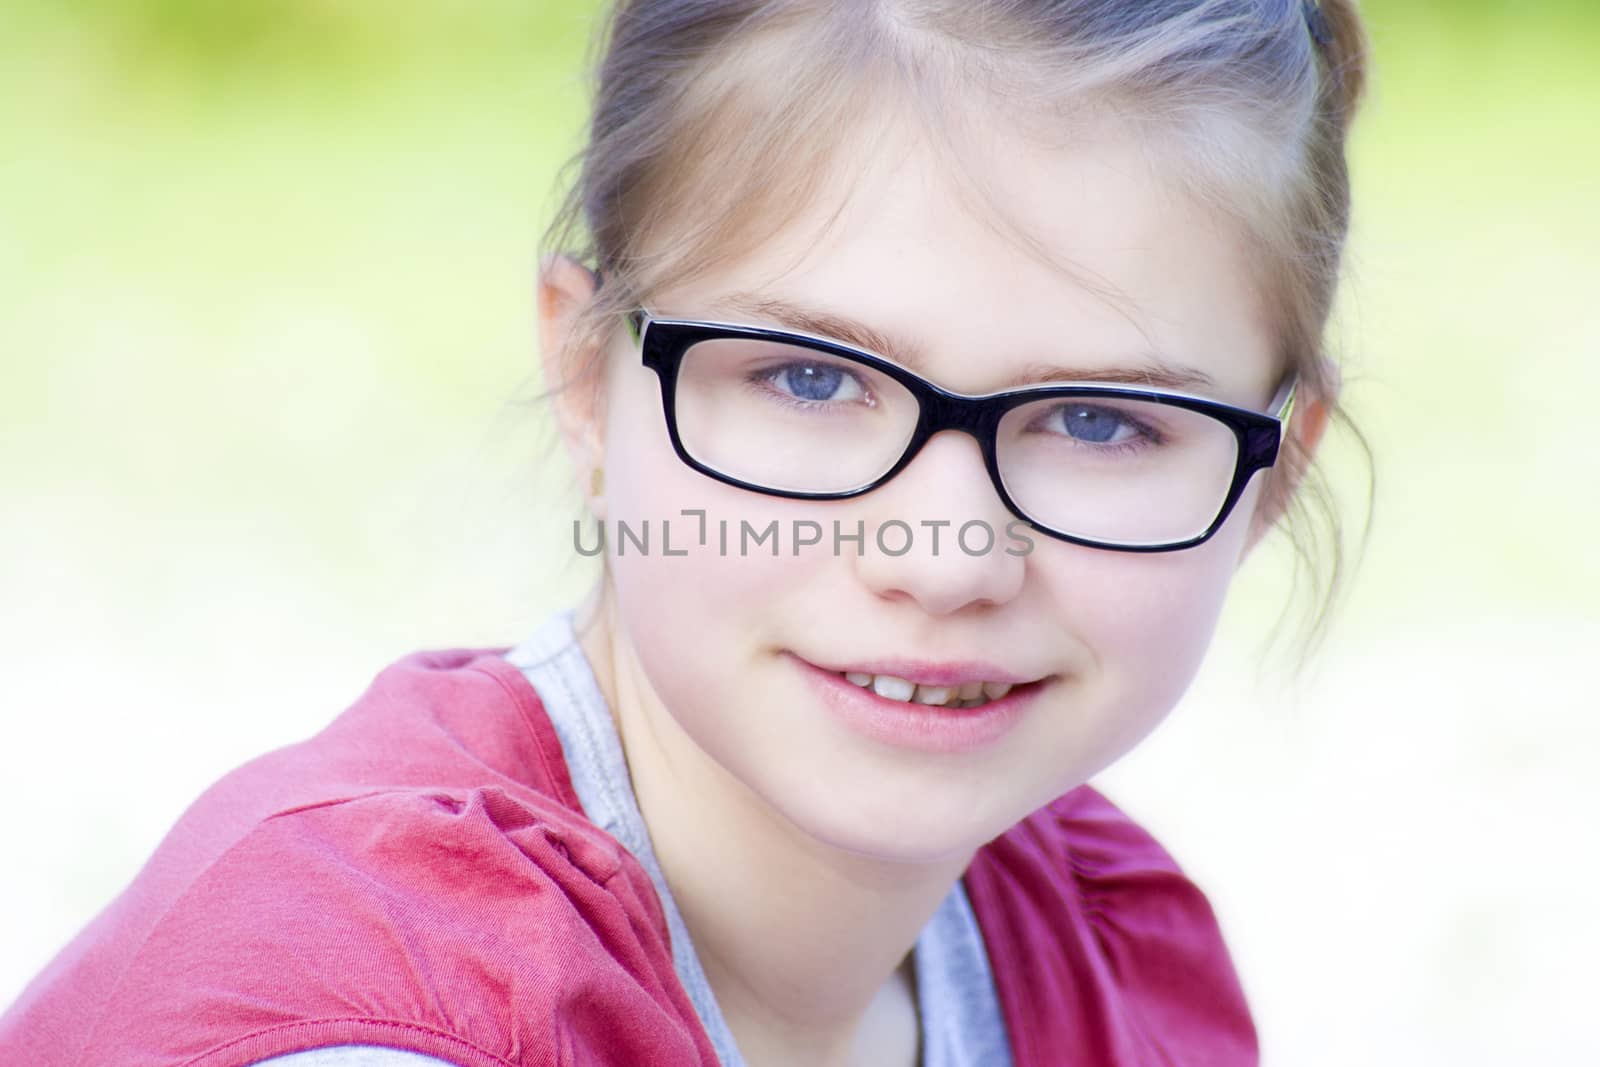 portrait of young girl with glasses by miradrozdowski